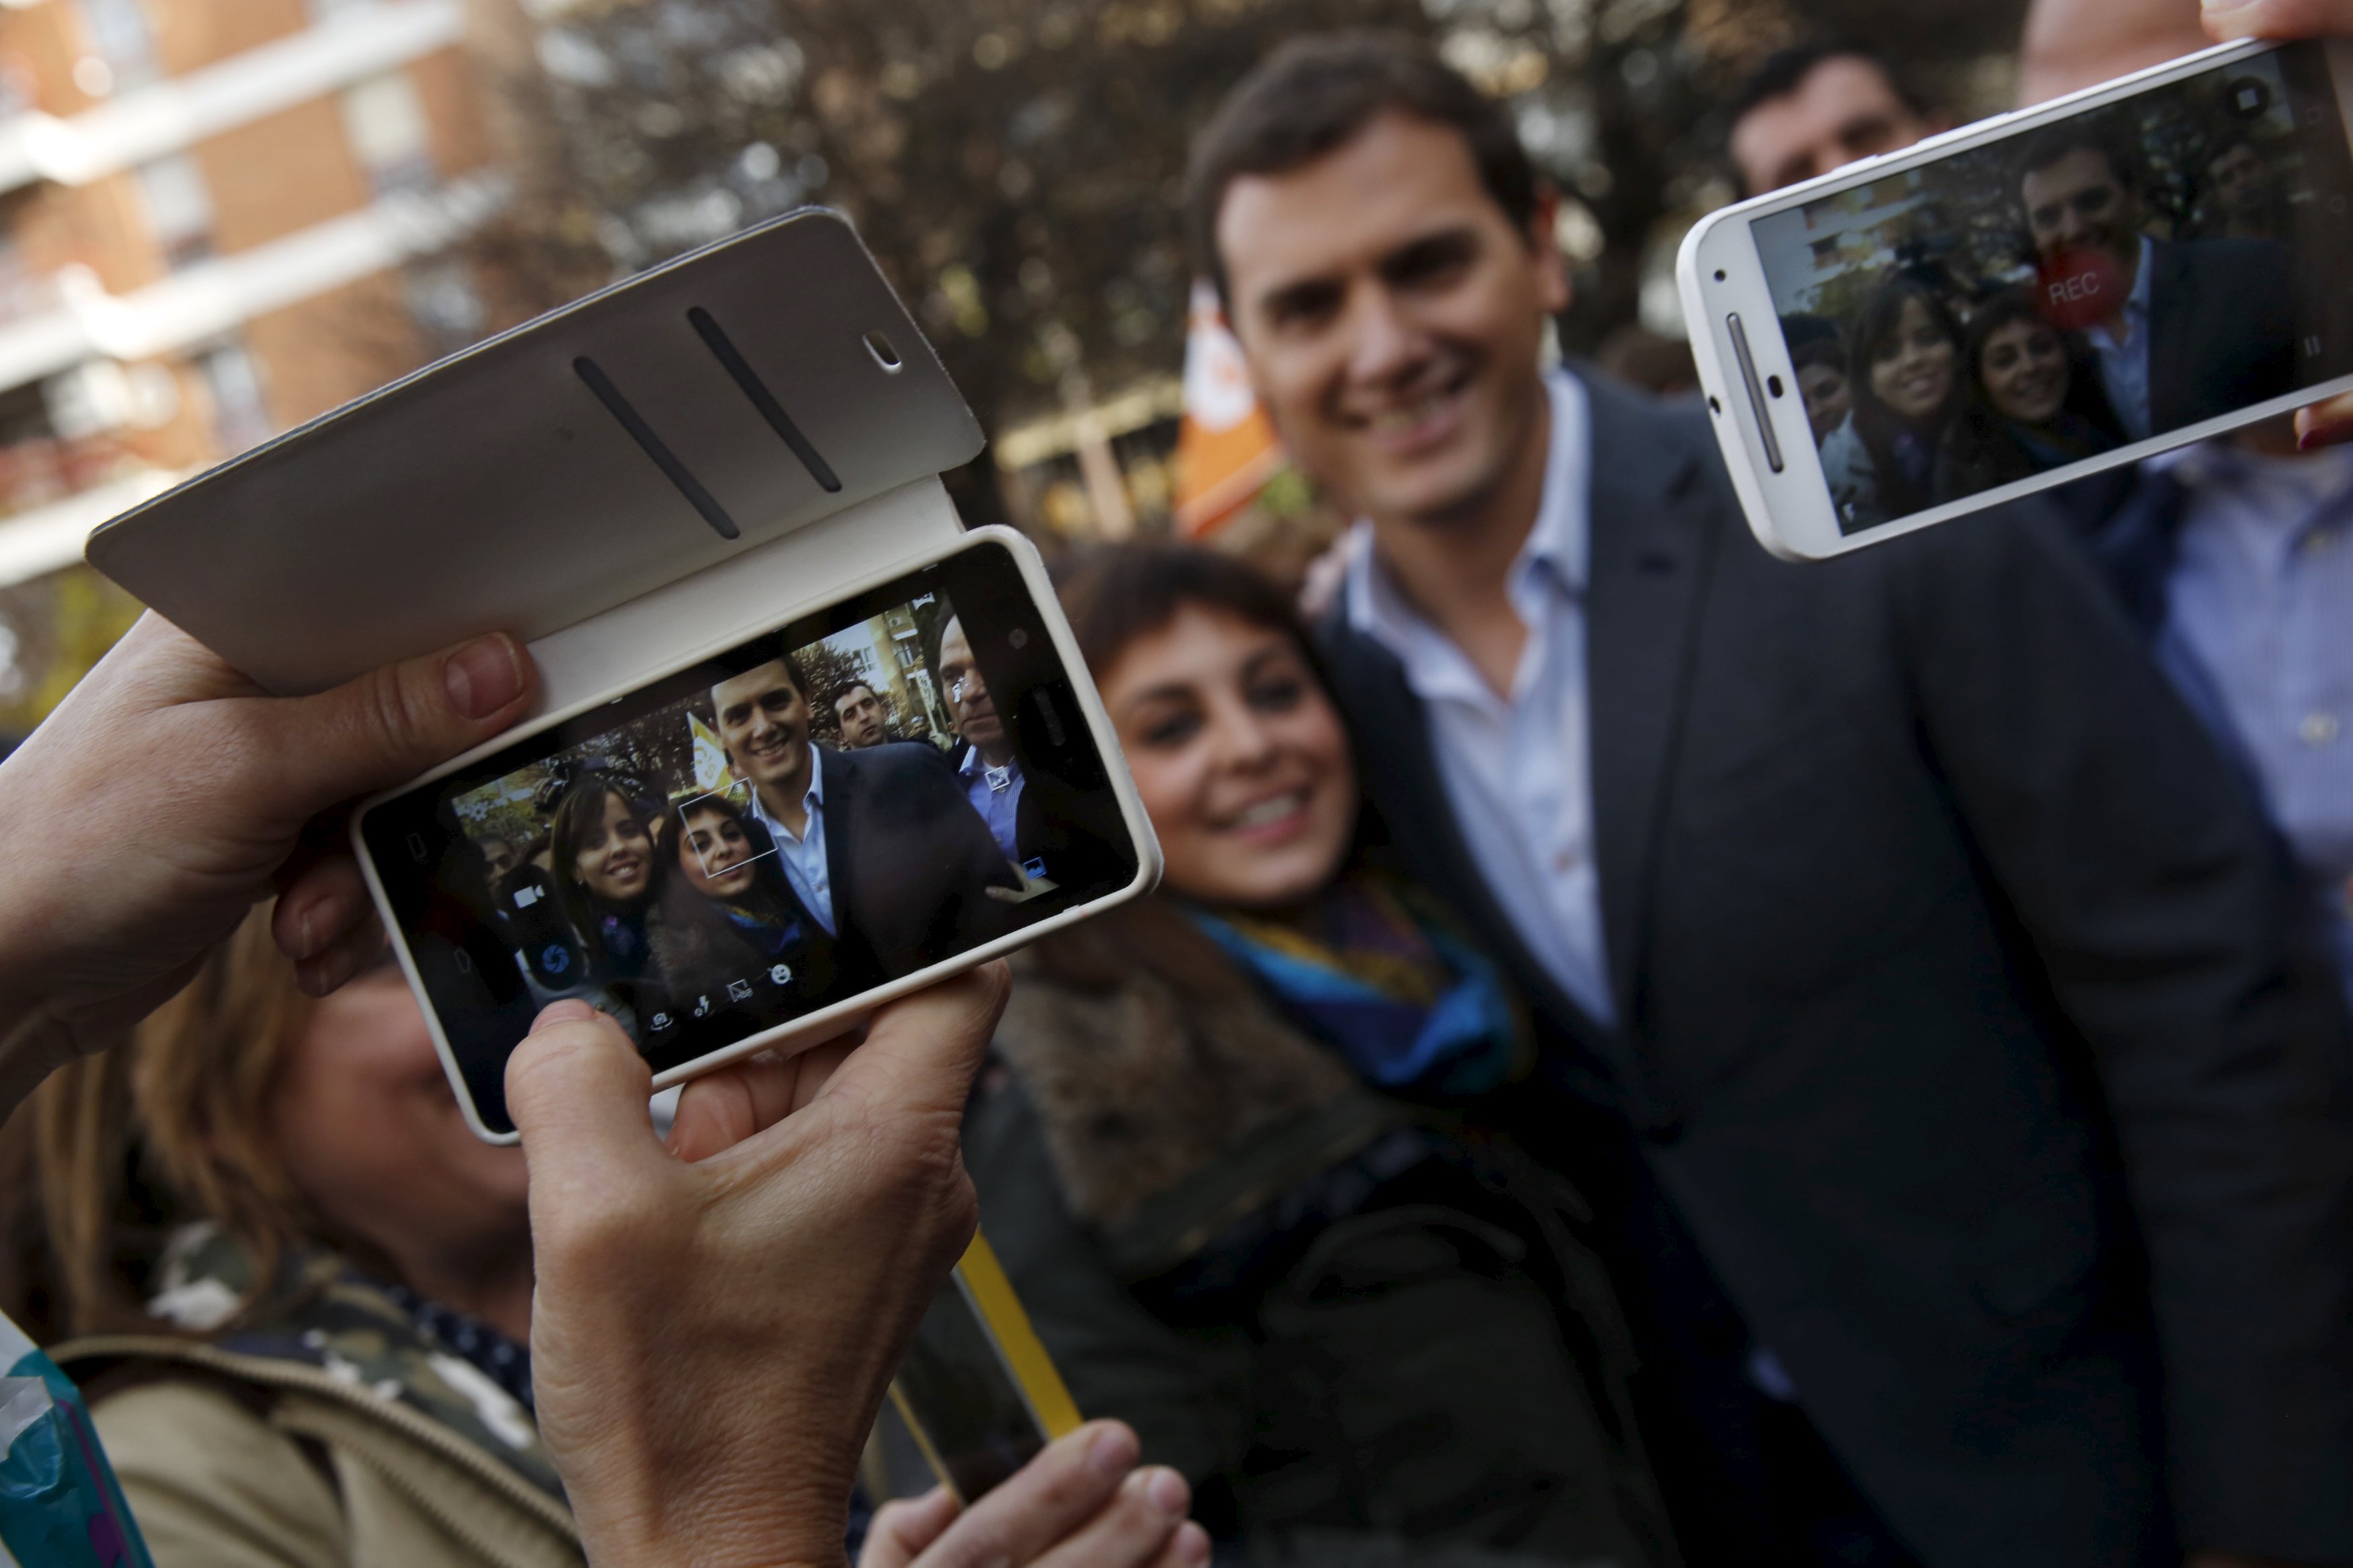 Ciudadanos party leader Albert Rivera (R), one of the four leading candidates for Spain's national election, takes a picture with a woman while on a walk on the streets of Guadalajara, Spain, December 15, 2015. REUTERS/Susana Vera TPX IMAGES OF THE DAY